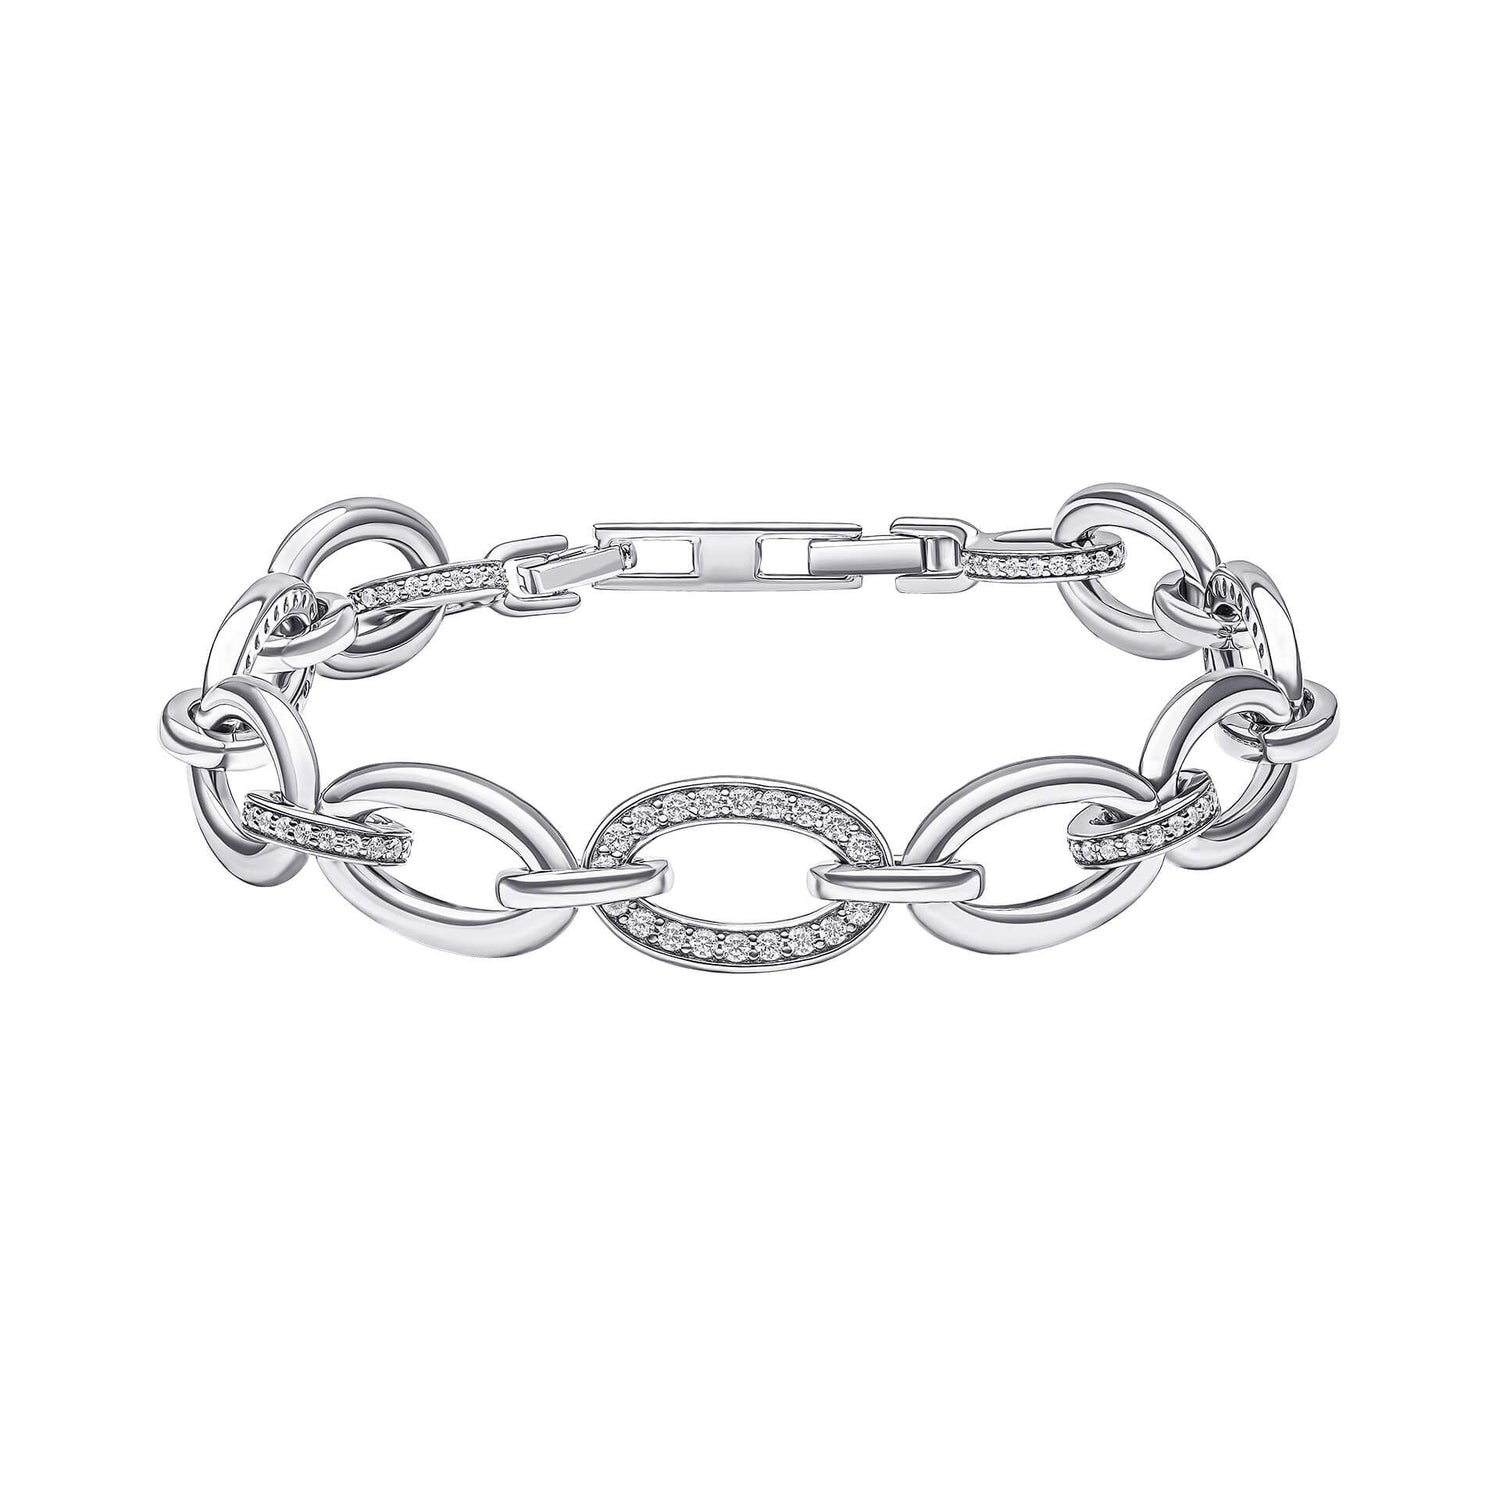 Silver and Zirconia Oval Link Chain Bracelet